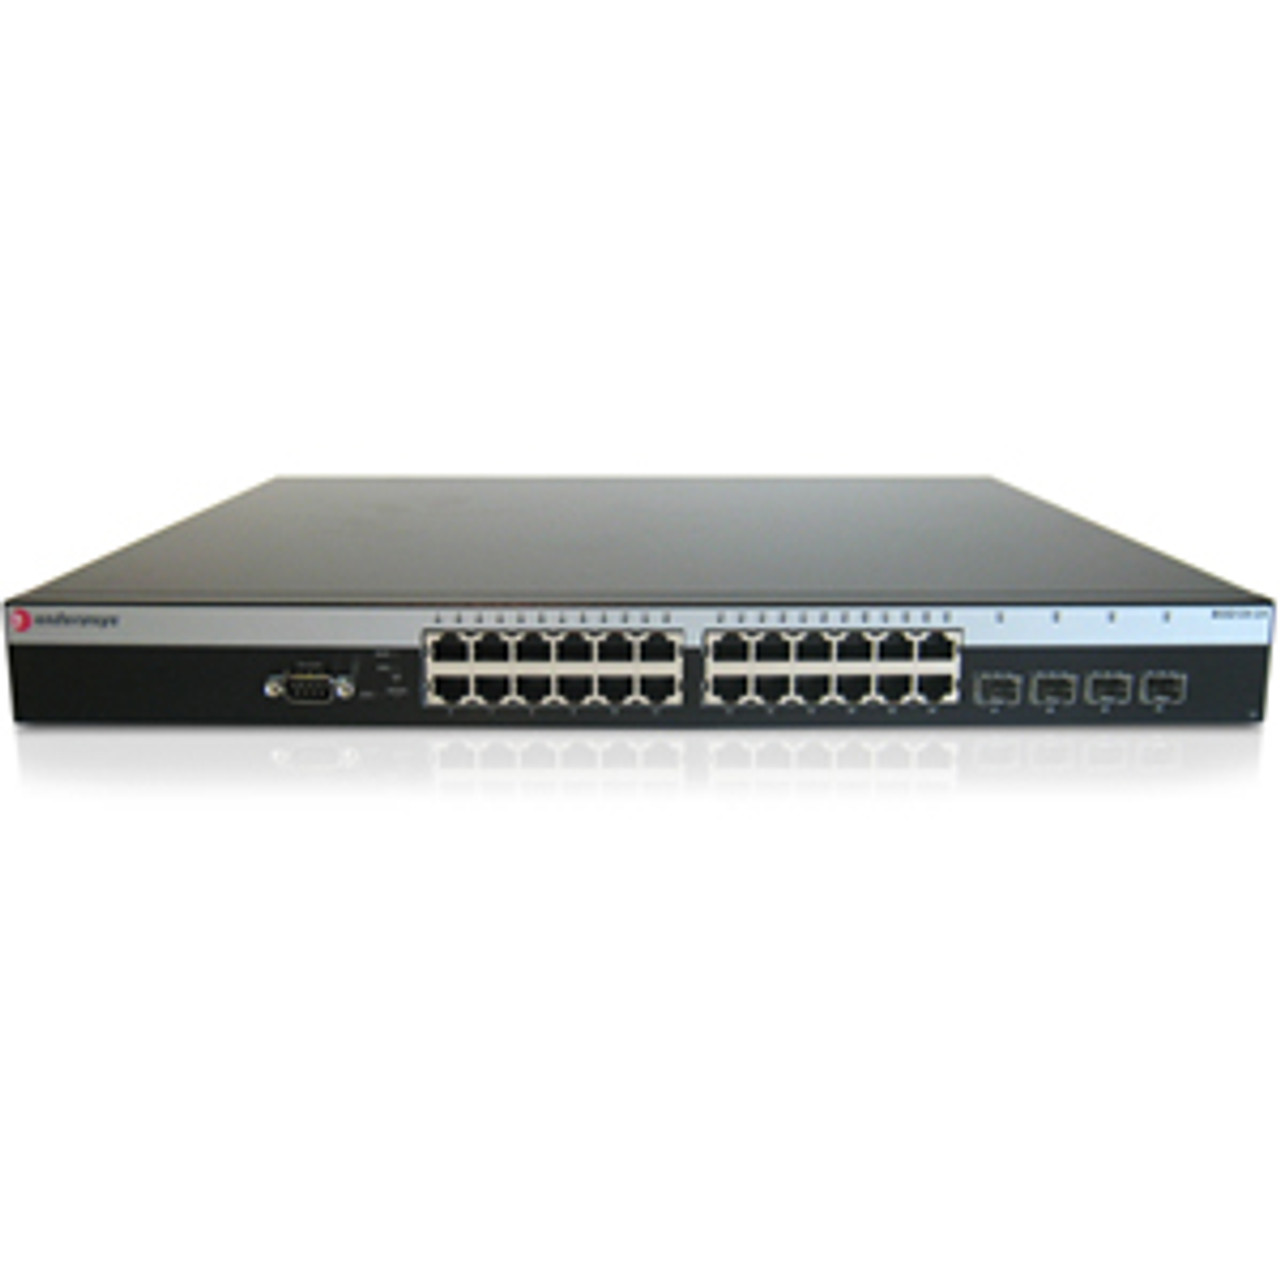 B5G124-24-G Enterasys B5G124-24 Gigabit Stackable Edge Switch TAA Compliant 24 Ports Manageable 24 x RJ-45 Stack Port 4 x Expansion Slots 10/100/1000Base-T